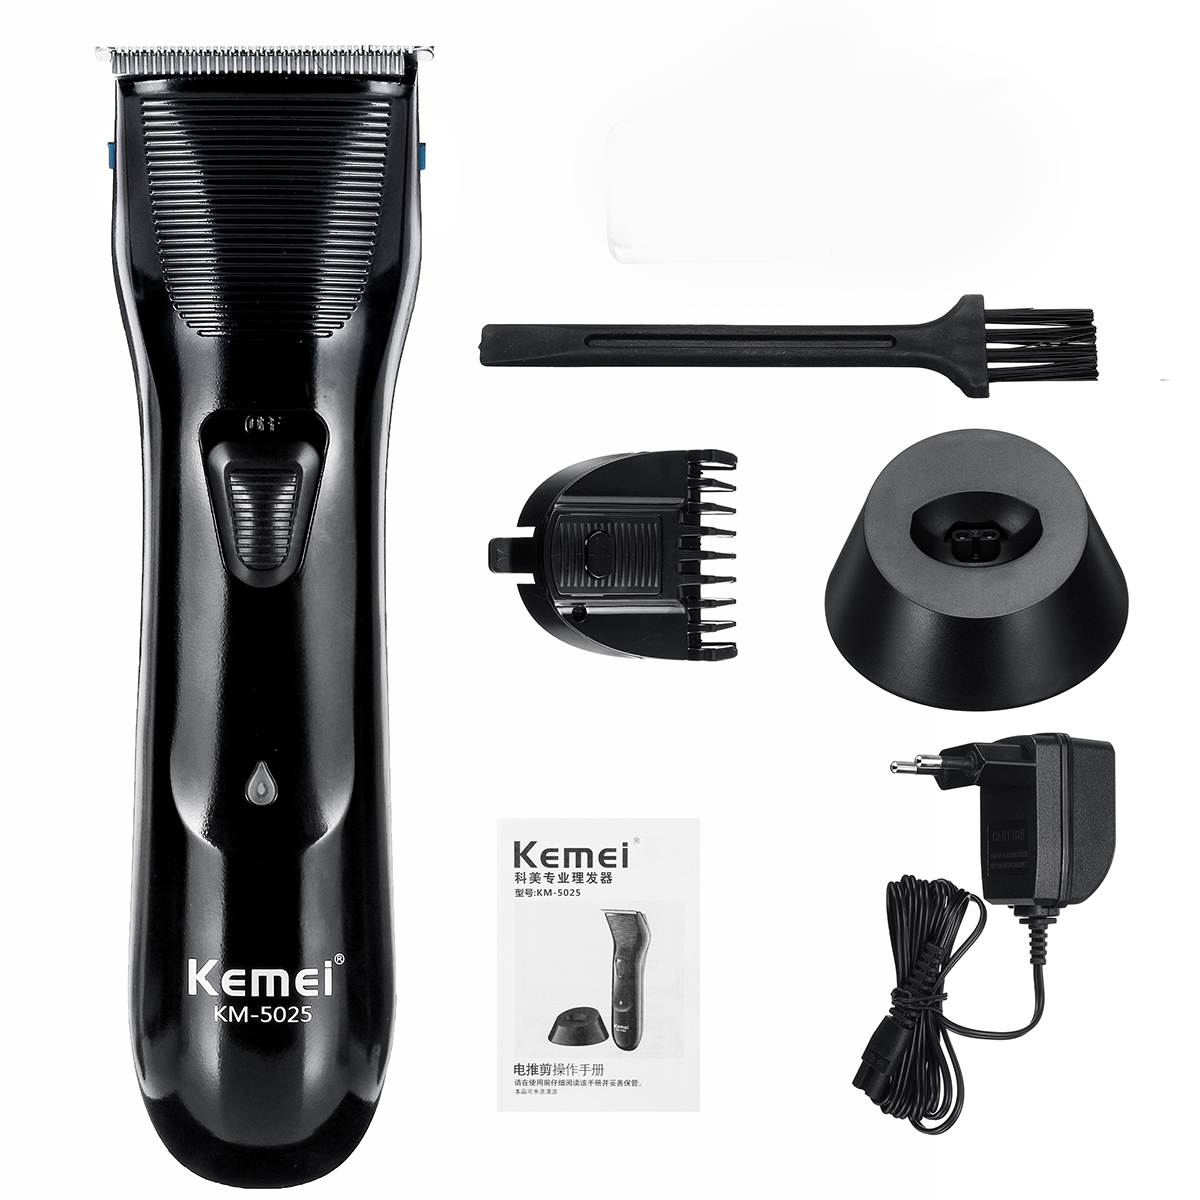 

Kemei Rechargeable Electric Hair Trimmer Cordless Clipper